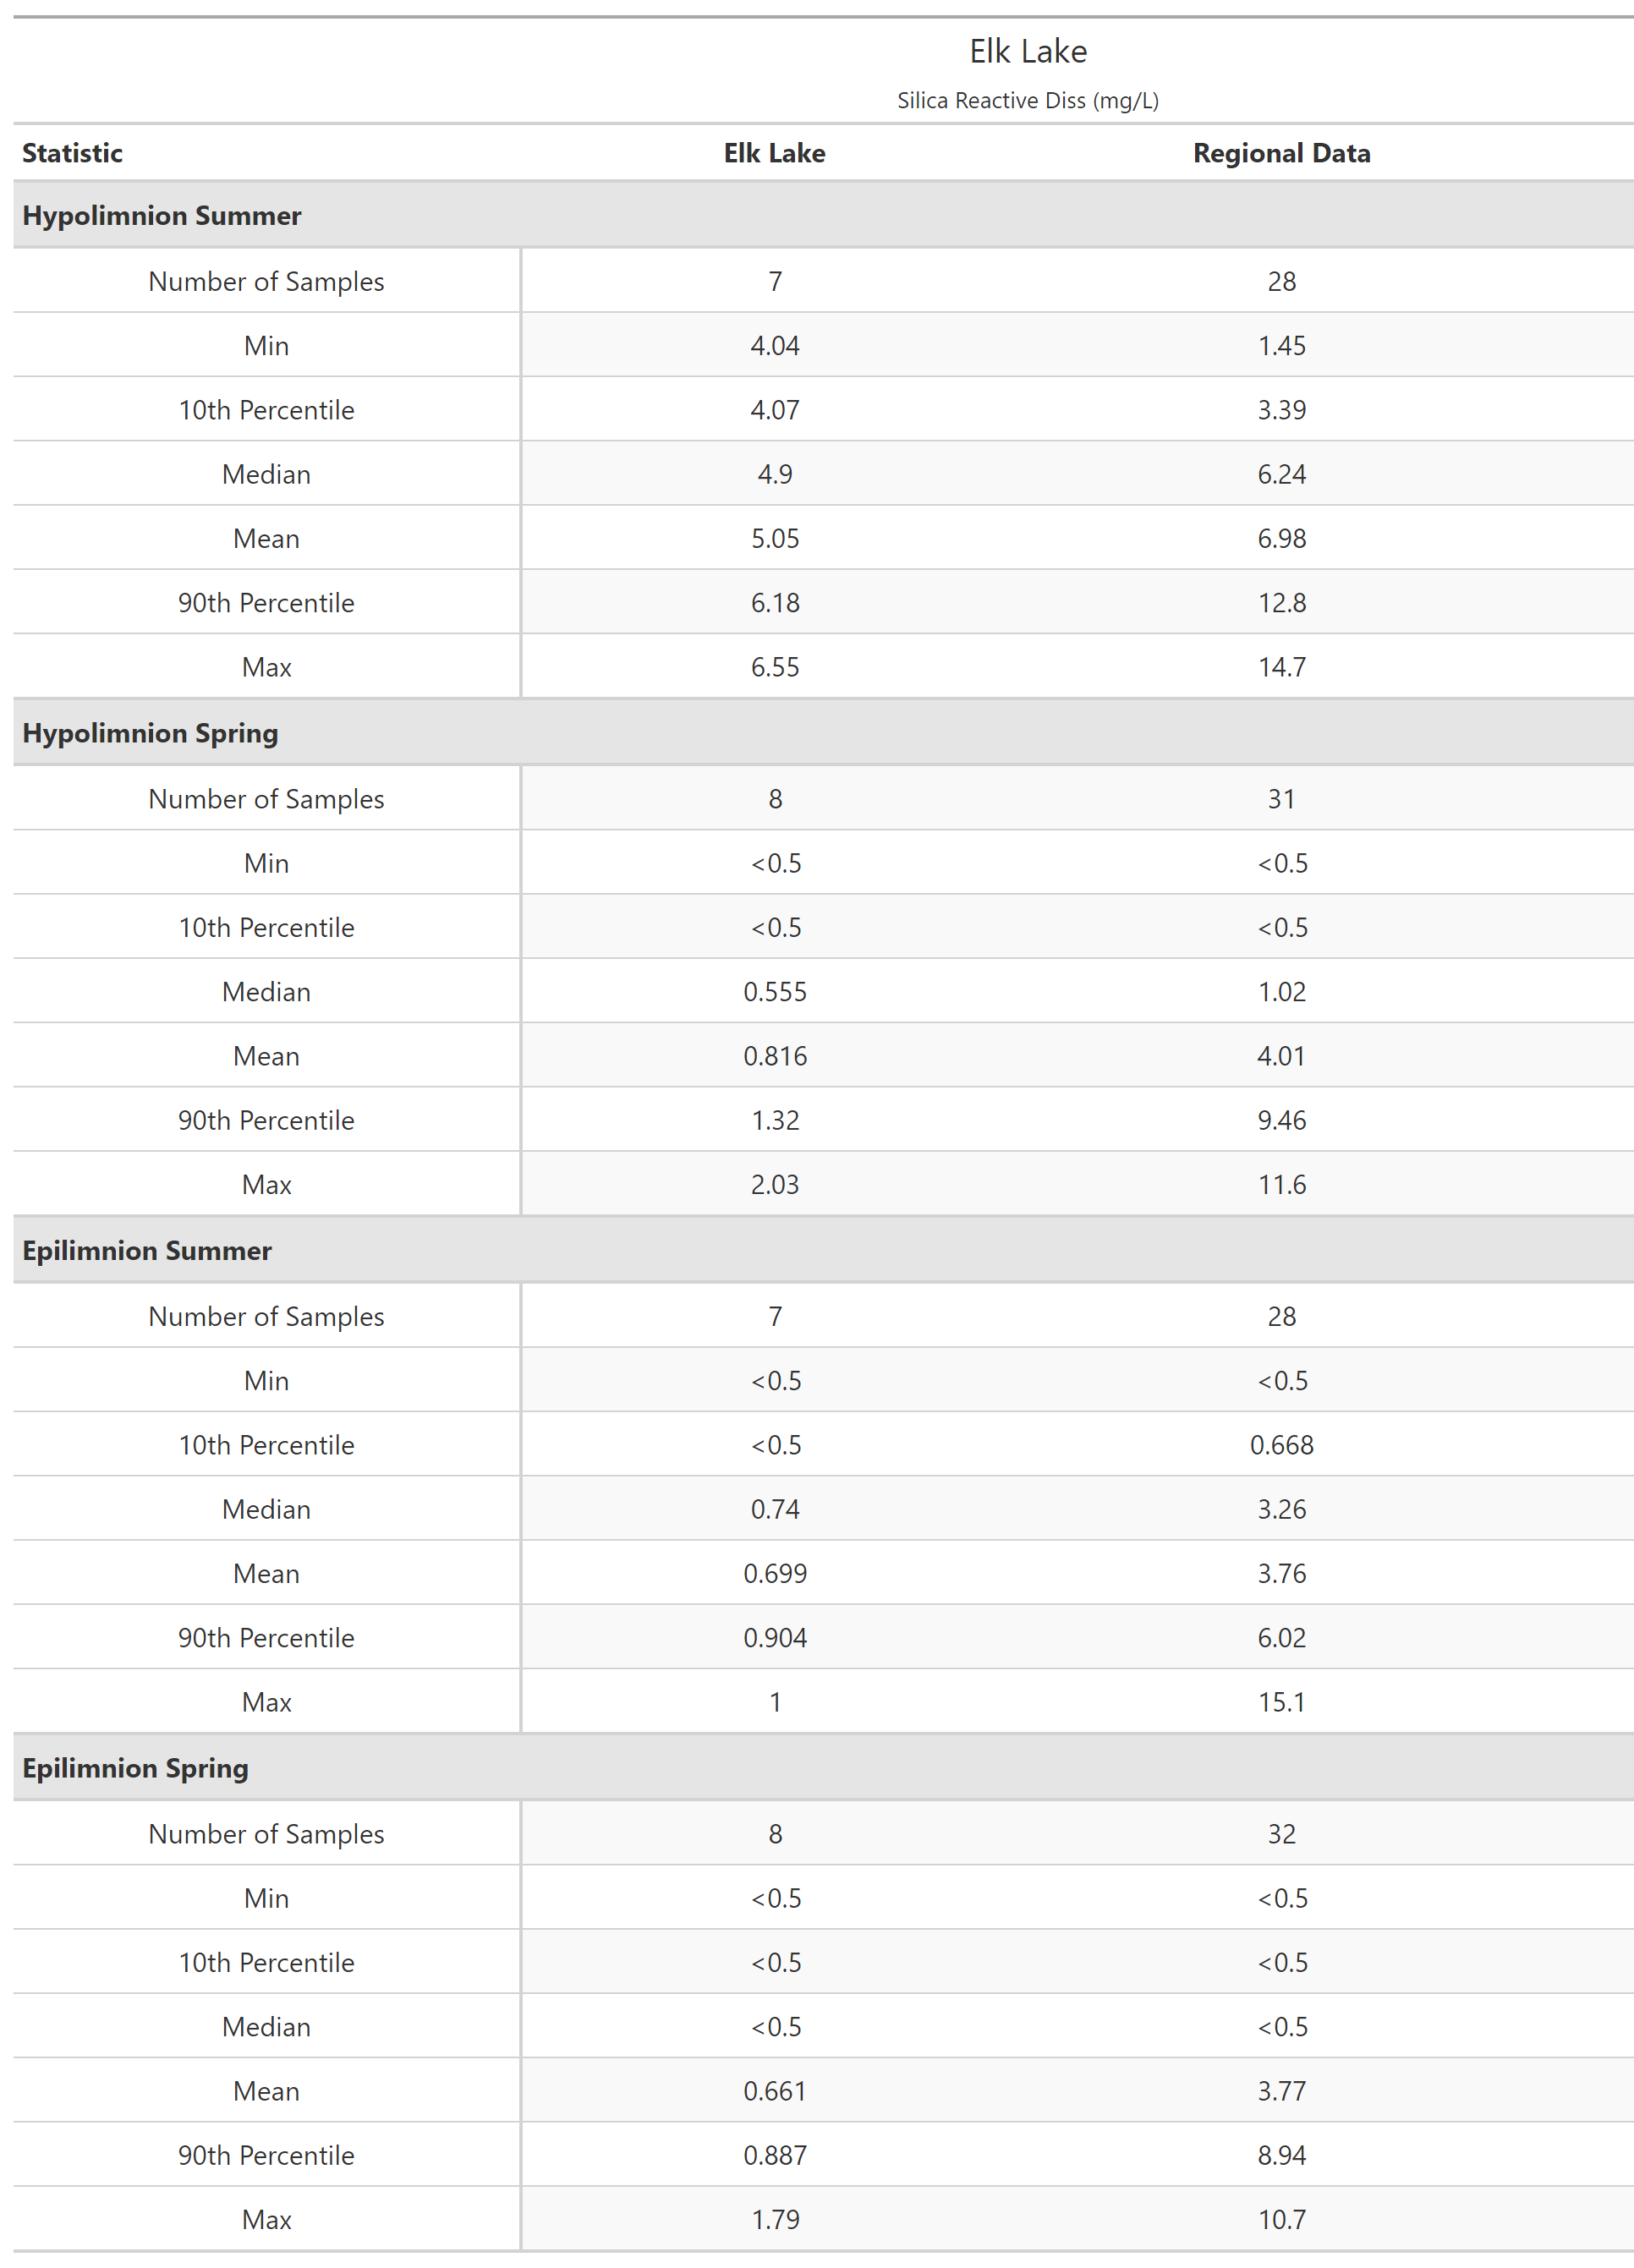 A table of summary statistics for Silica Reactive Diss with comparison to regional data